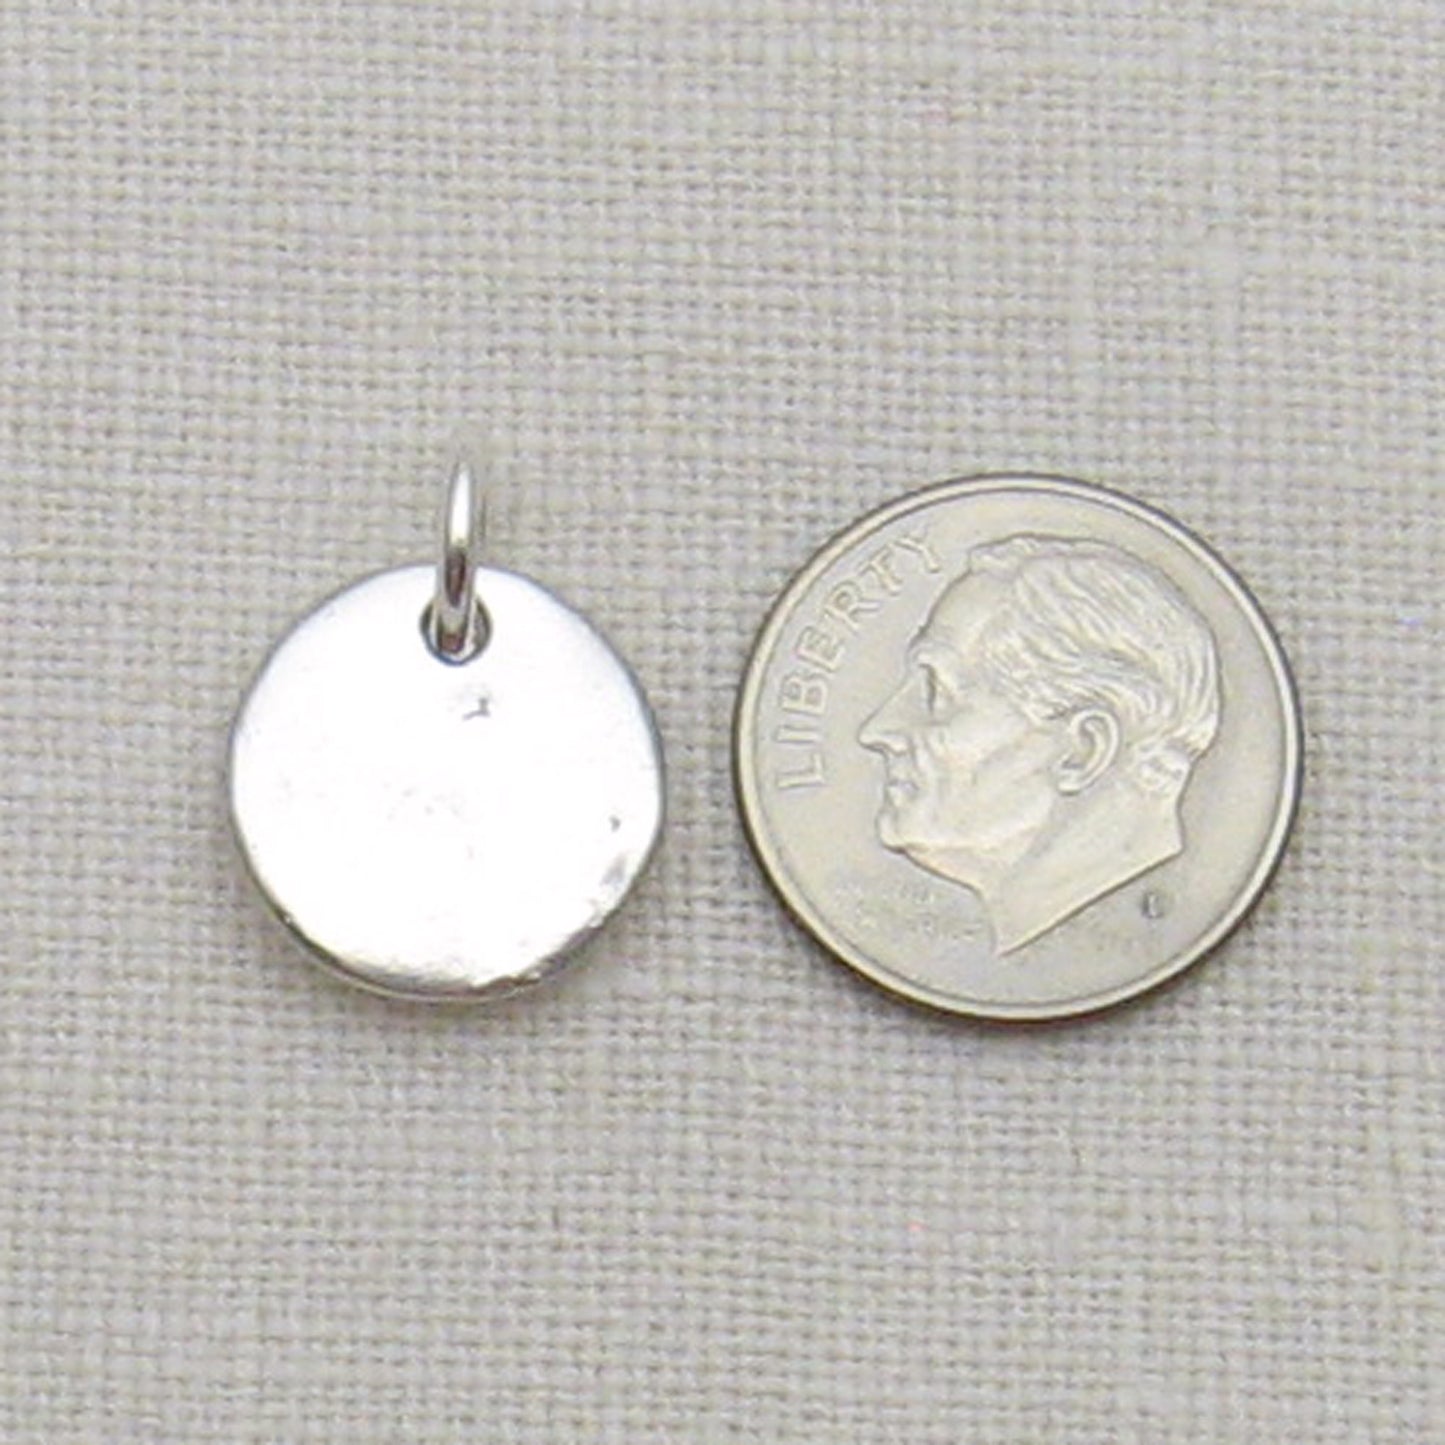 Half Inch Circle Cremation Ashes Pendant back and size reference